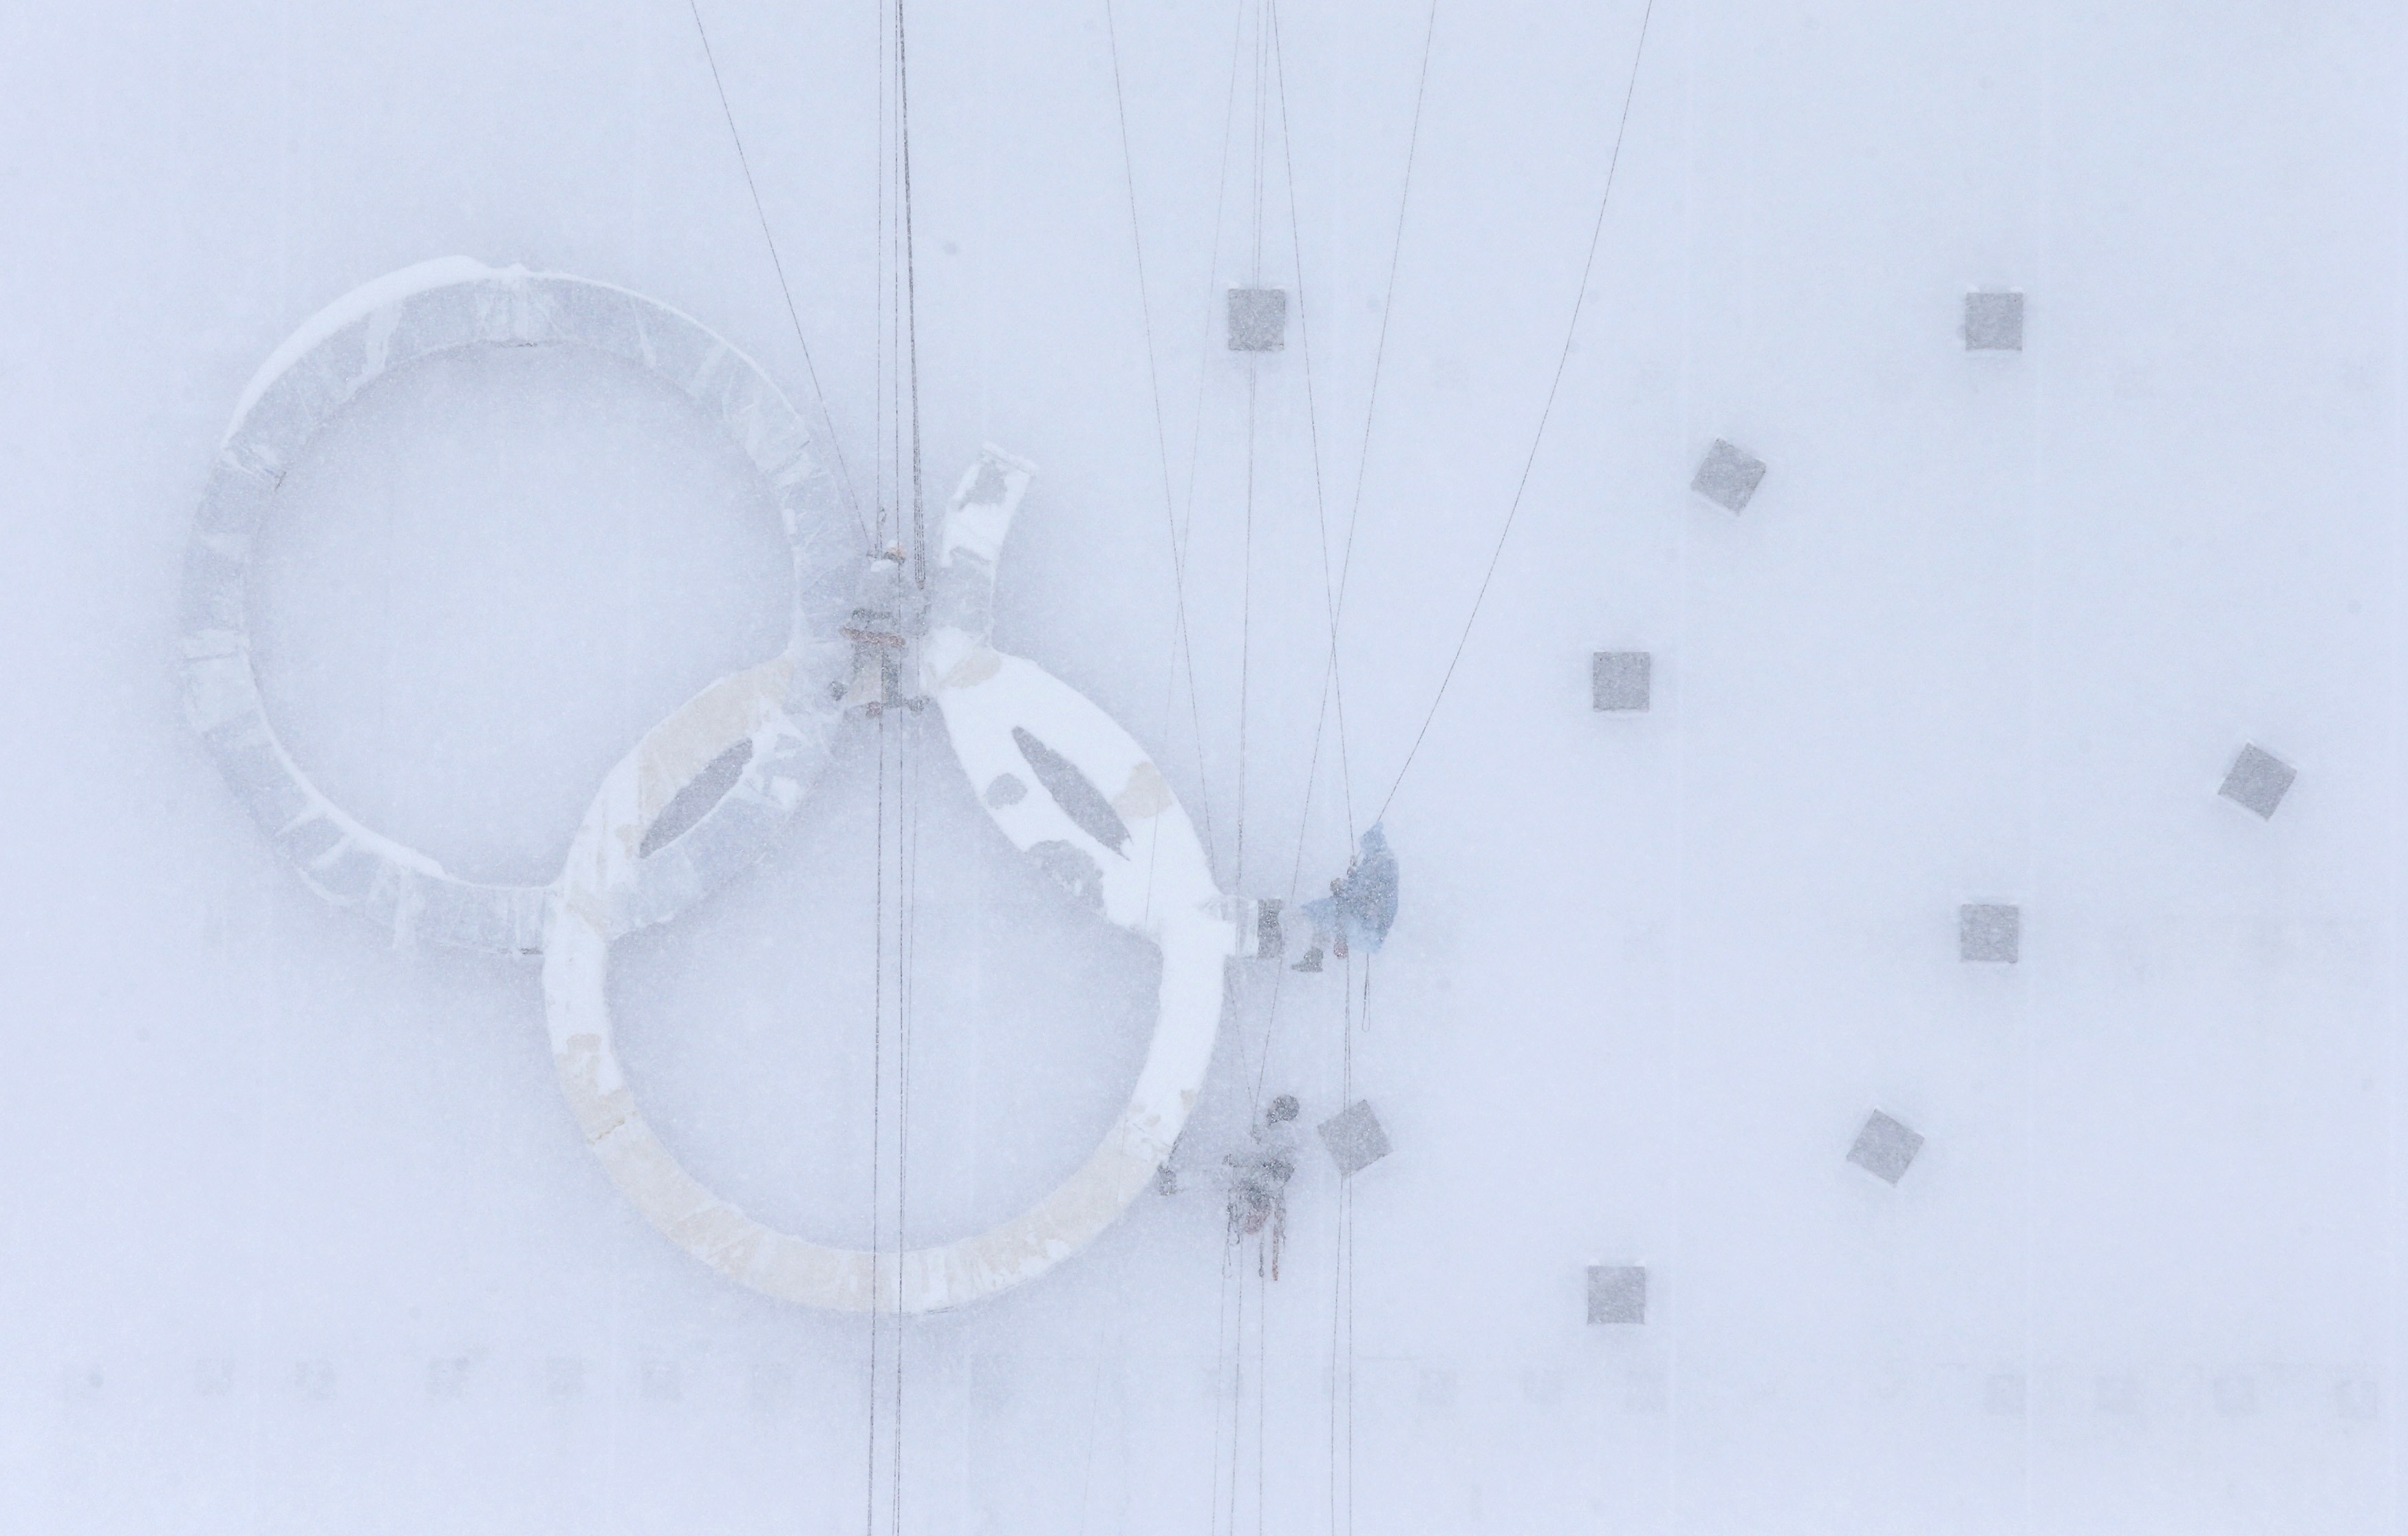 People work on the Olympic rings during heavy snow at one of the Games venues ahead of the 2014 Sochi Olympics. Photo: Reuters